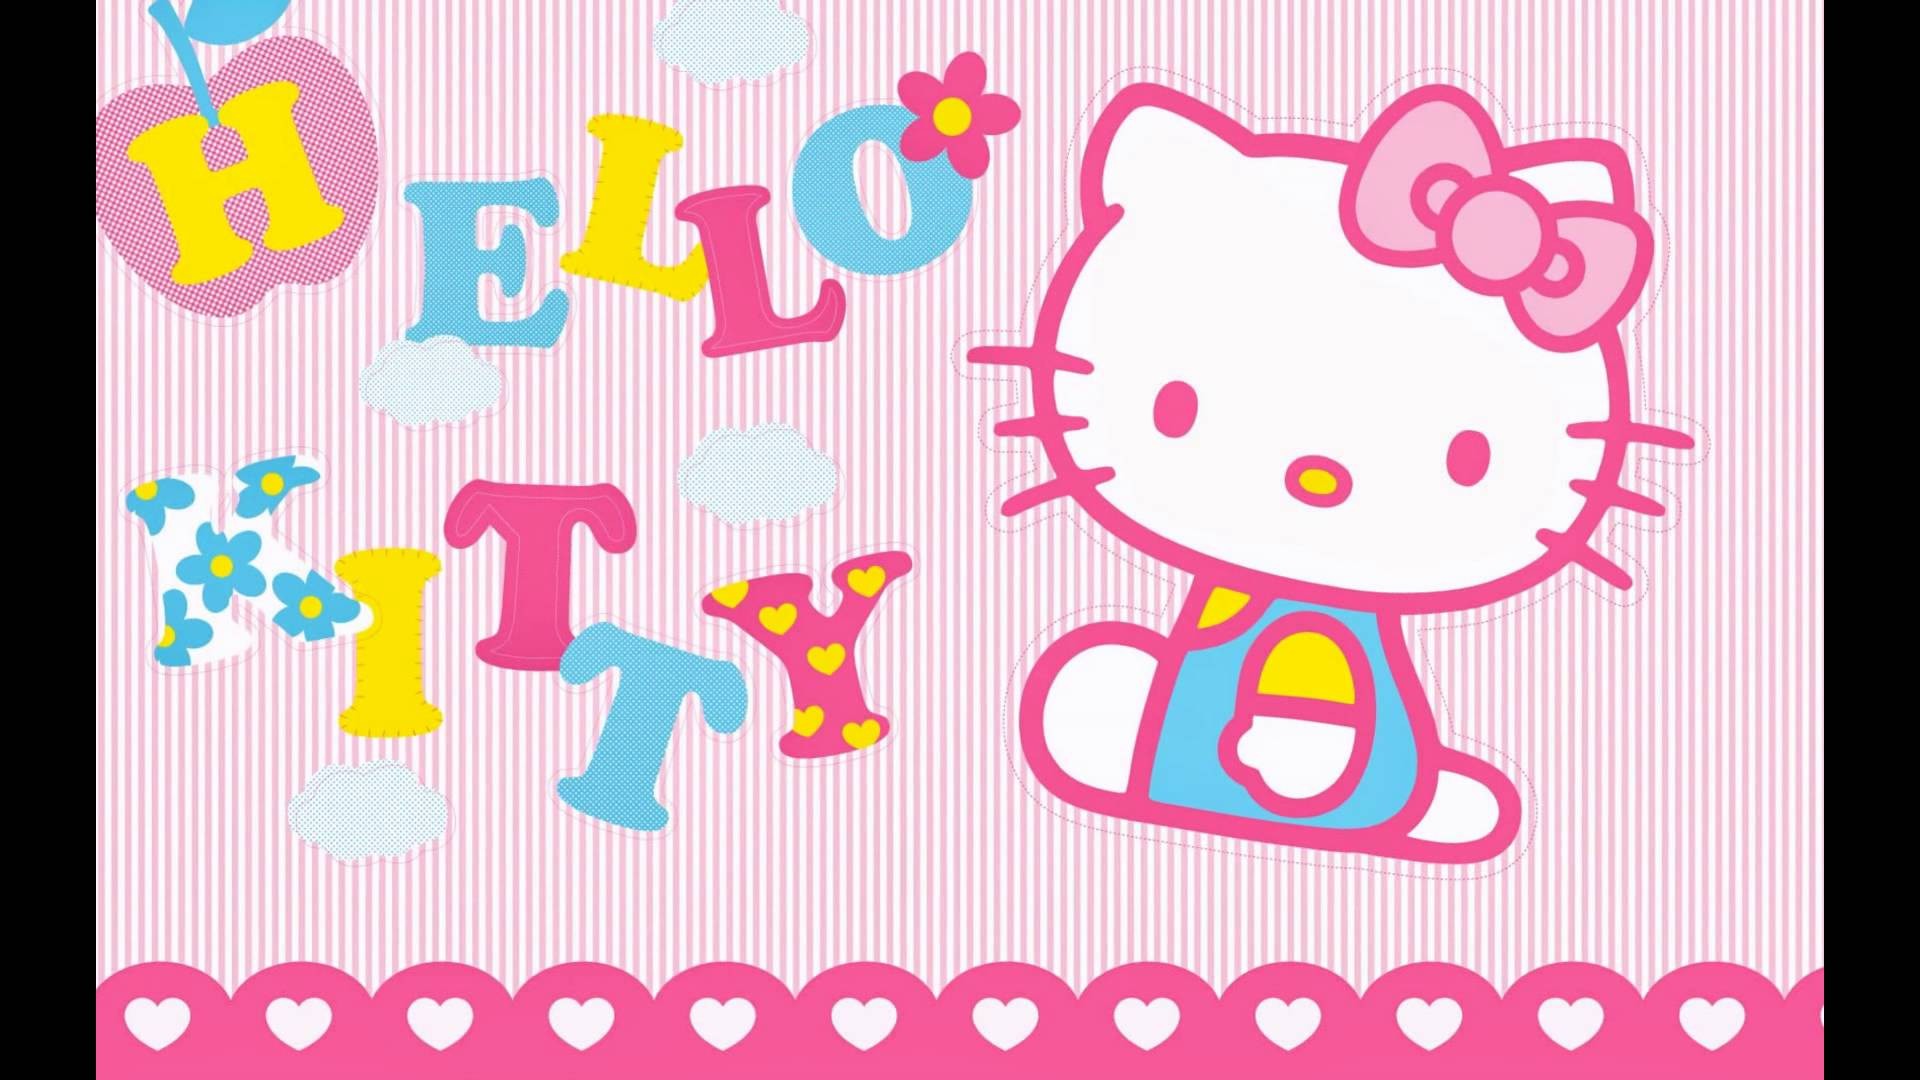 Hello Kitty Images Desktop Backgrounds HD with image resolution 1920x1080 pixel. You can use this wallpaper as background for your desktop Computer Screensavers, Android or iPhone smartphones